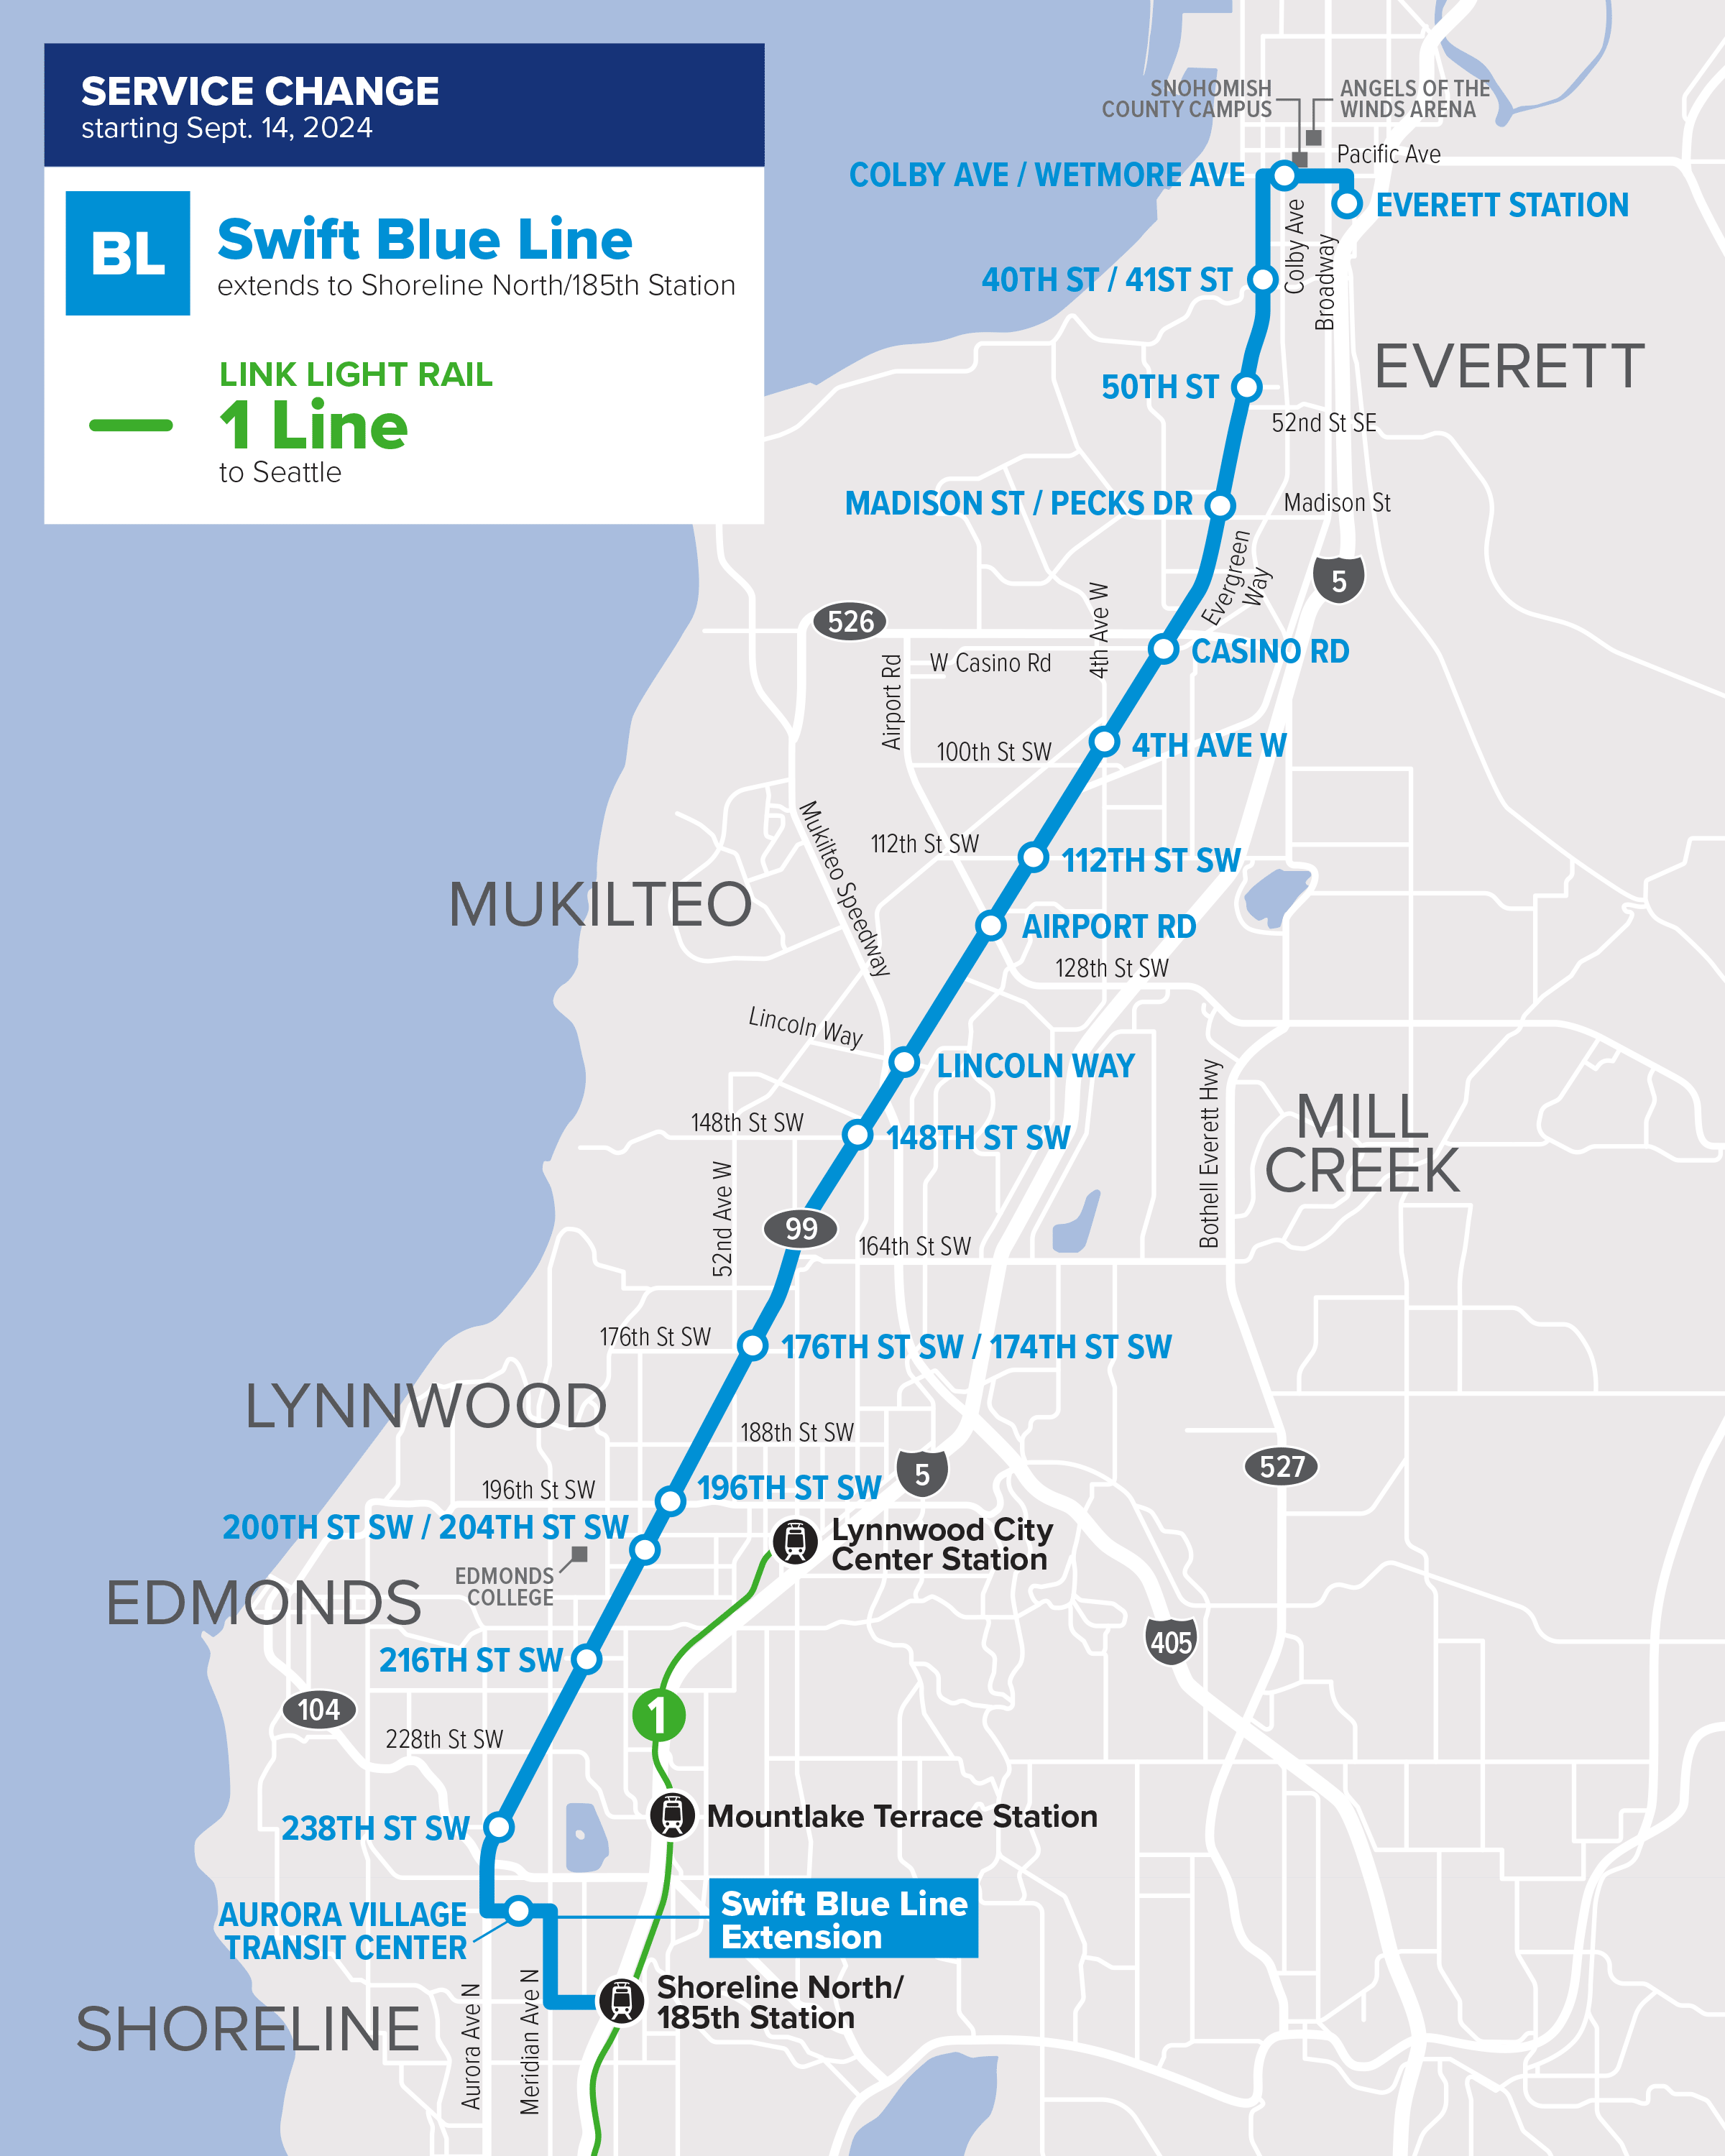 Swift Blue Line Map - Transit 2024 and Beyond